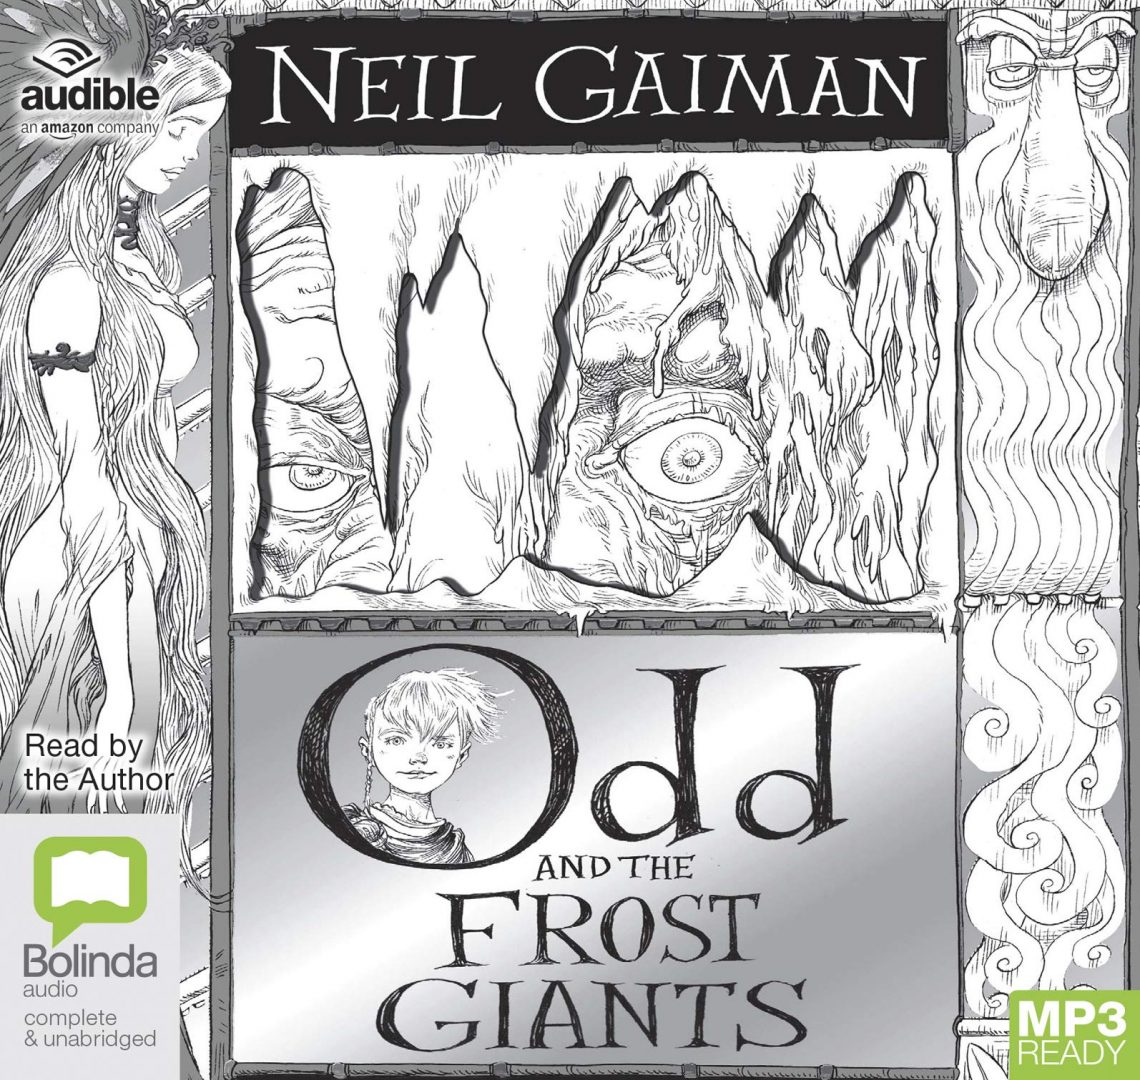 Odd and the Frost Giants Audiobook Free Download